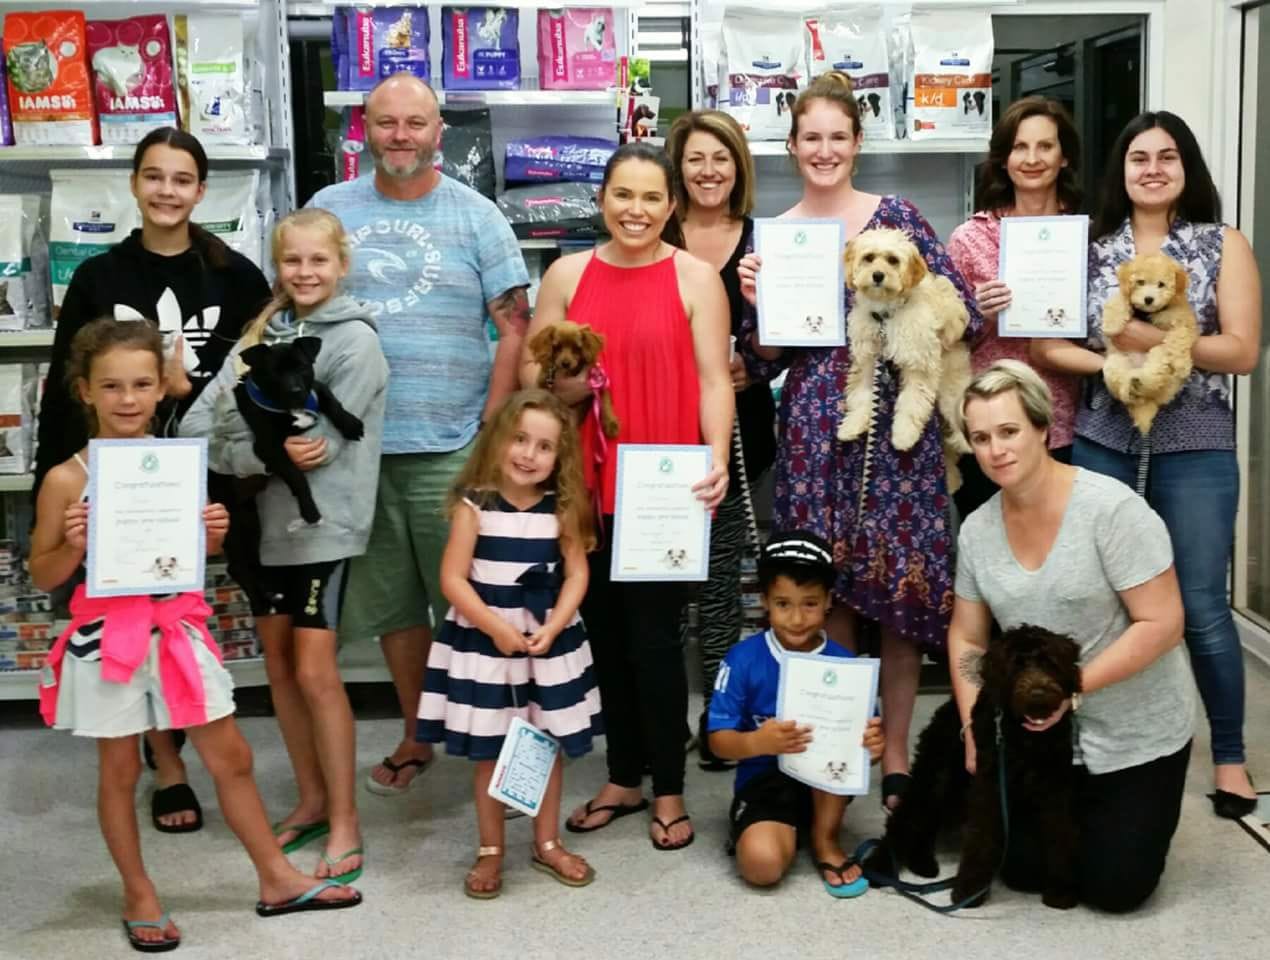 All Terrigal Vet Puppy Pre-School graduates learn important socialisation skills and develop basic manners like sit and stay